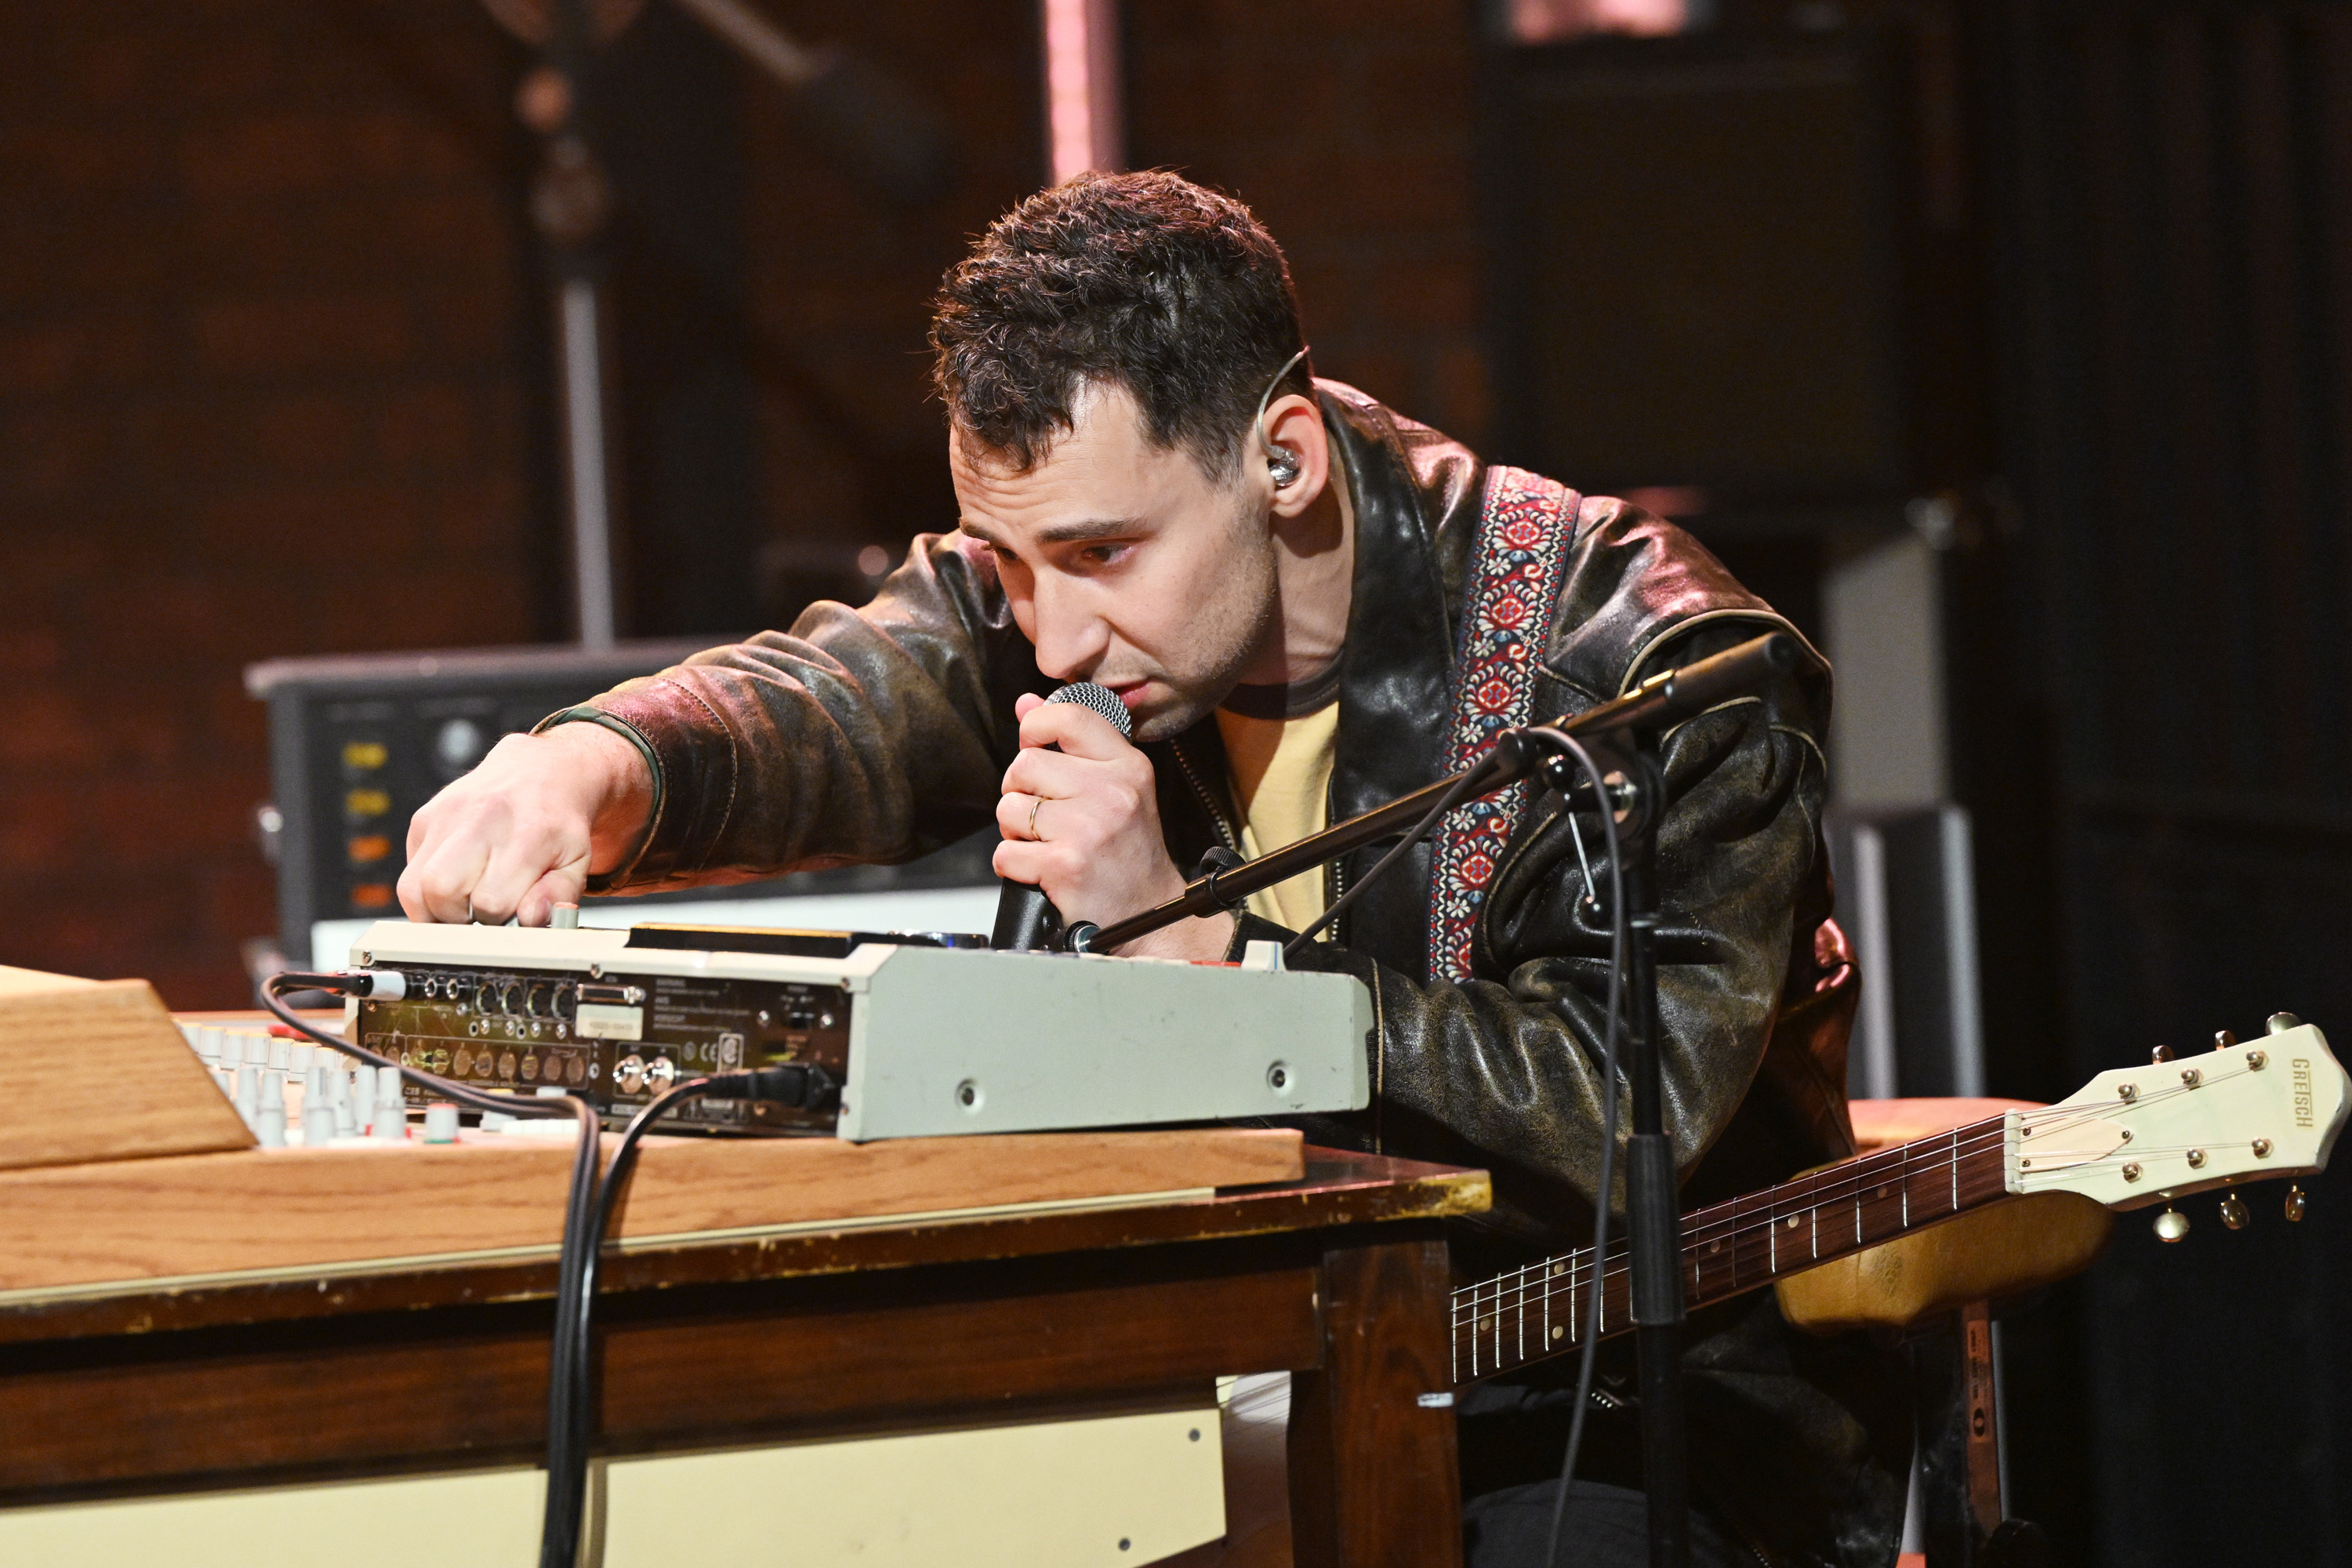 jack at a keyboard with a microphone, wearing a leather jacket, engaged in producing